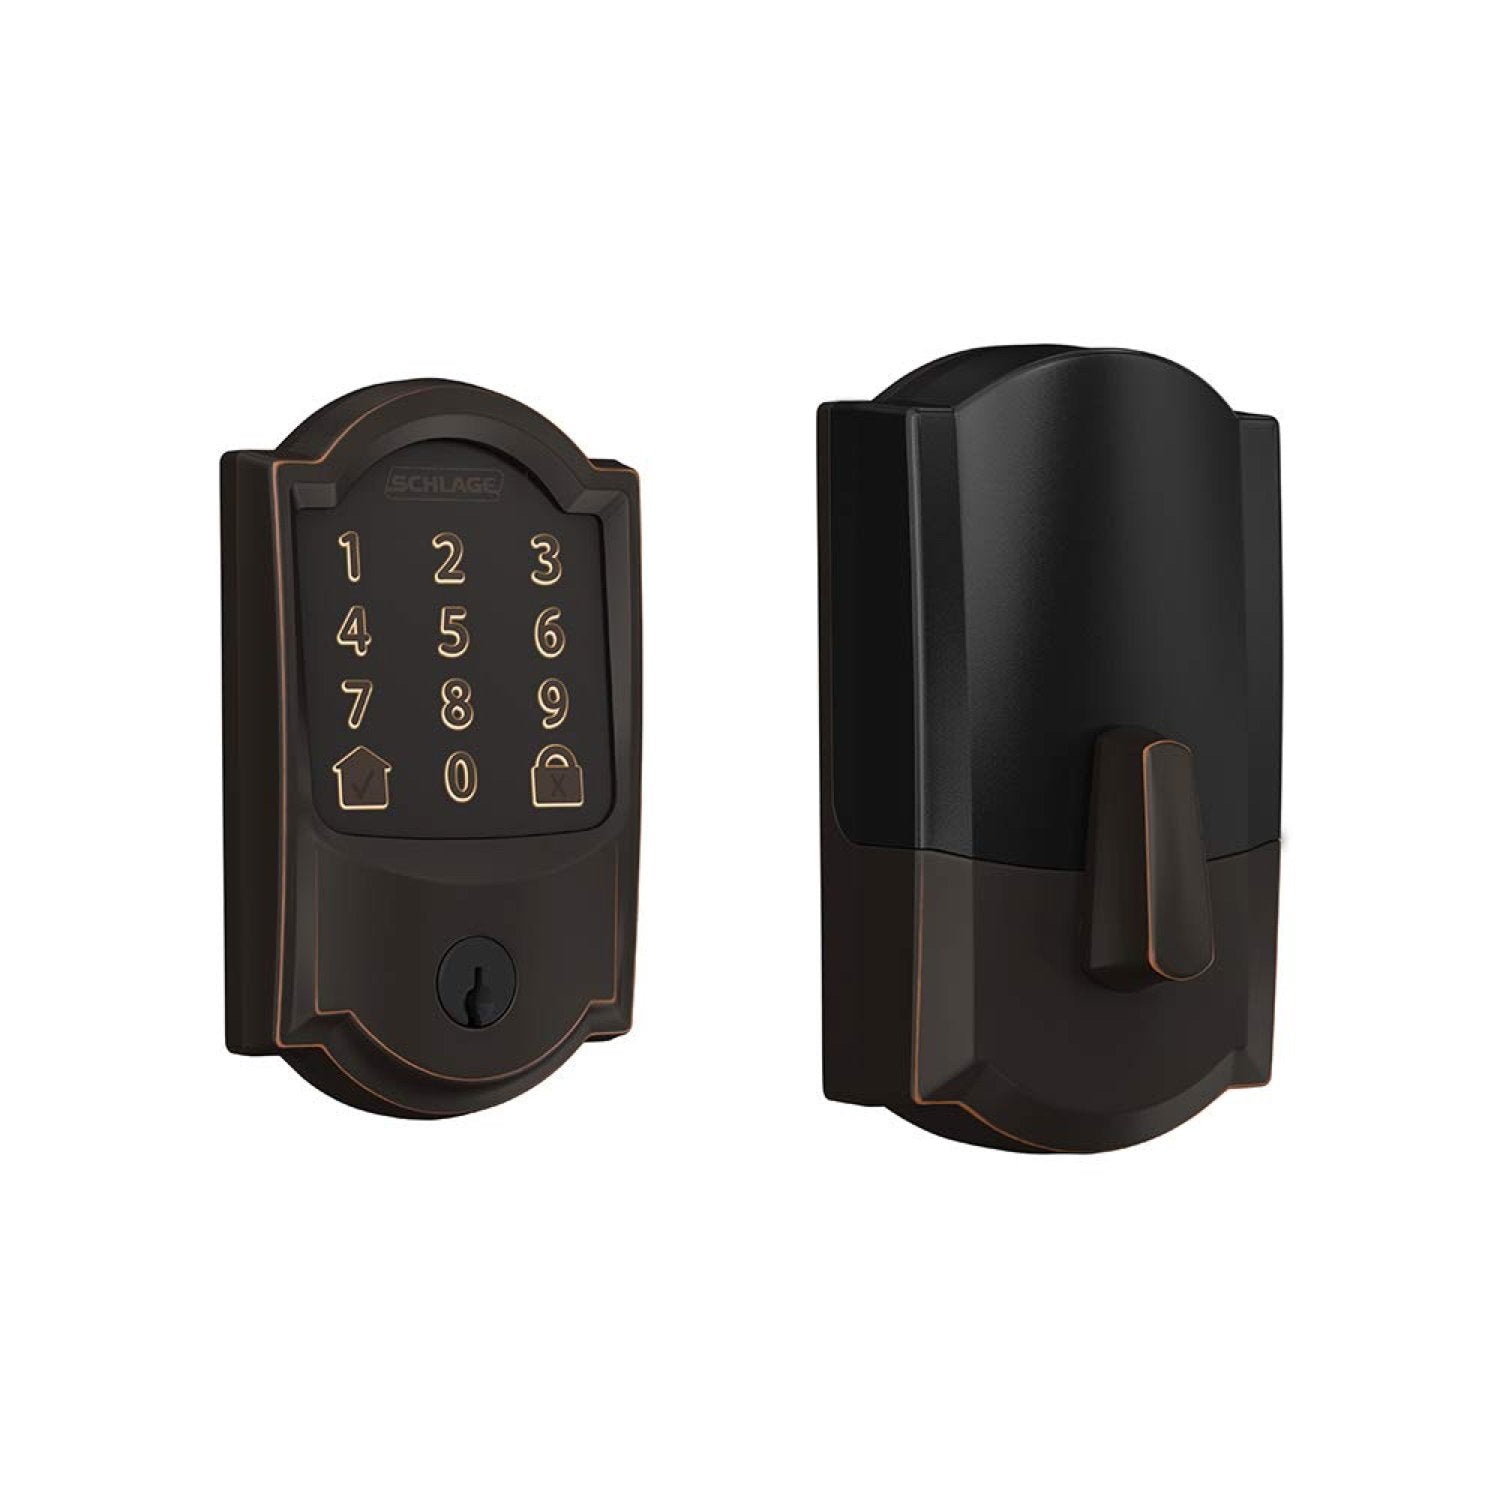 Schlage Encode Smart WiFi Deadbolt with Camelot Trim (for Works with Ring Video Doorbells and Cameras) - Aged Bronze